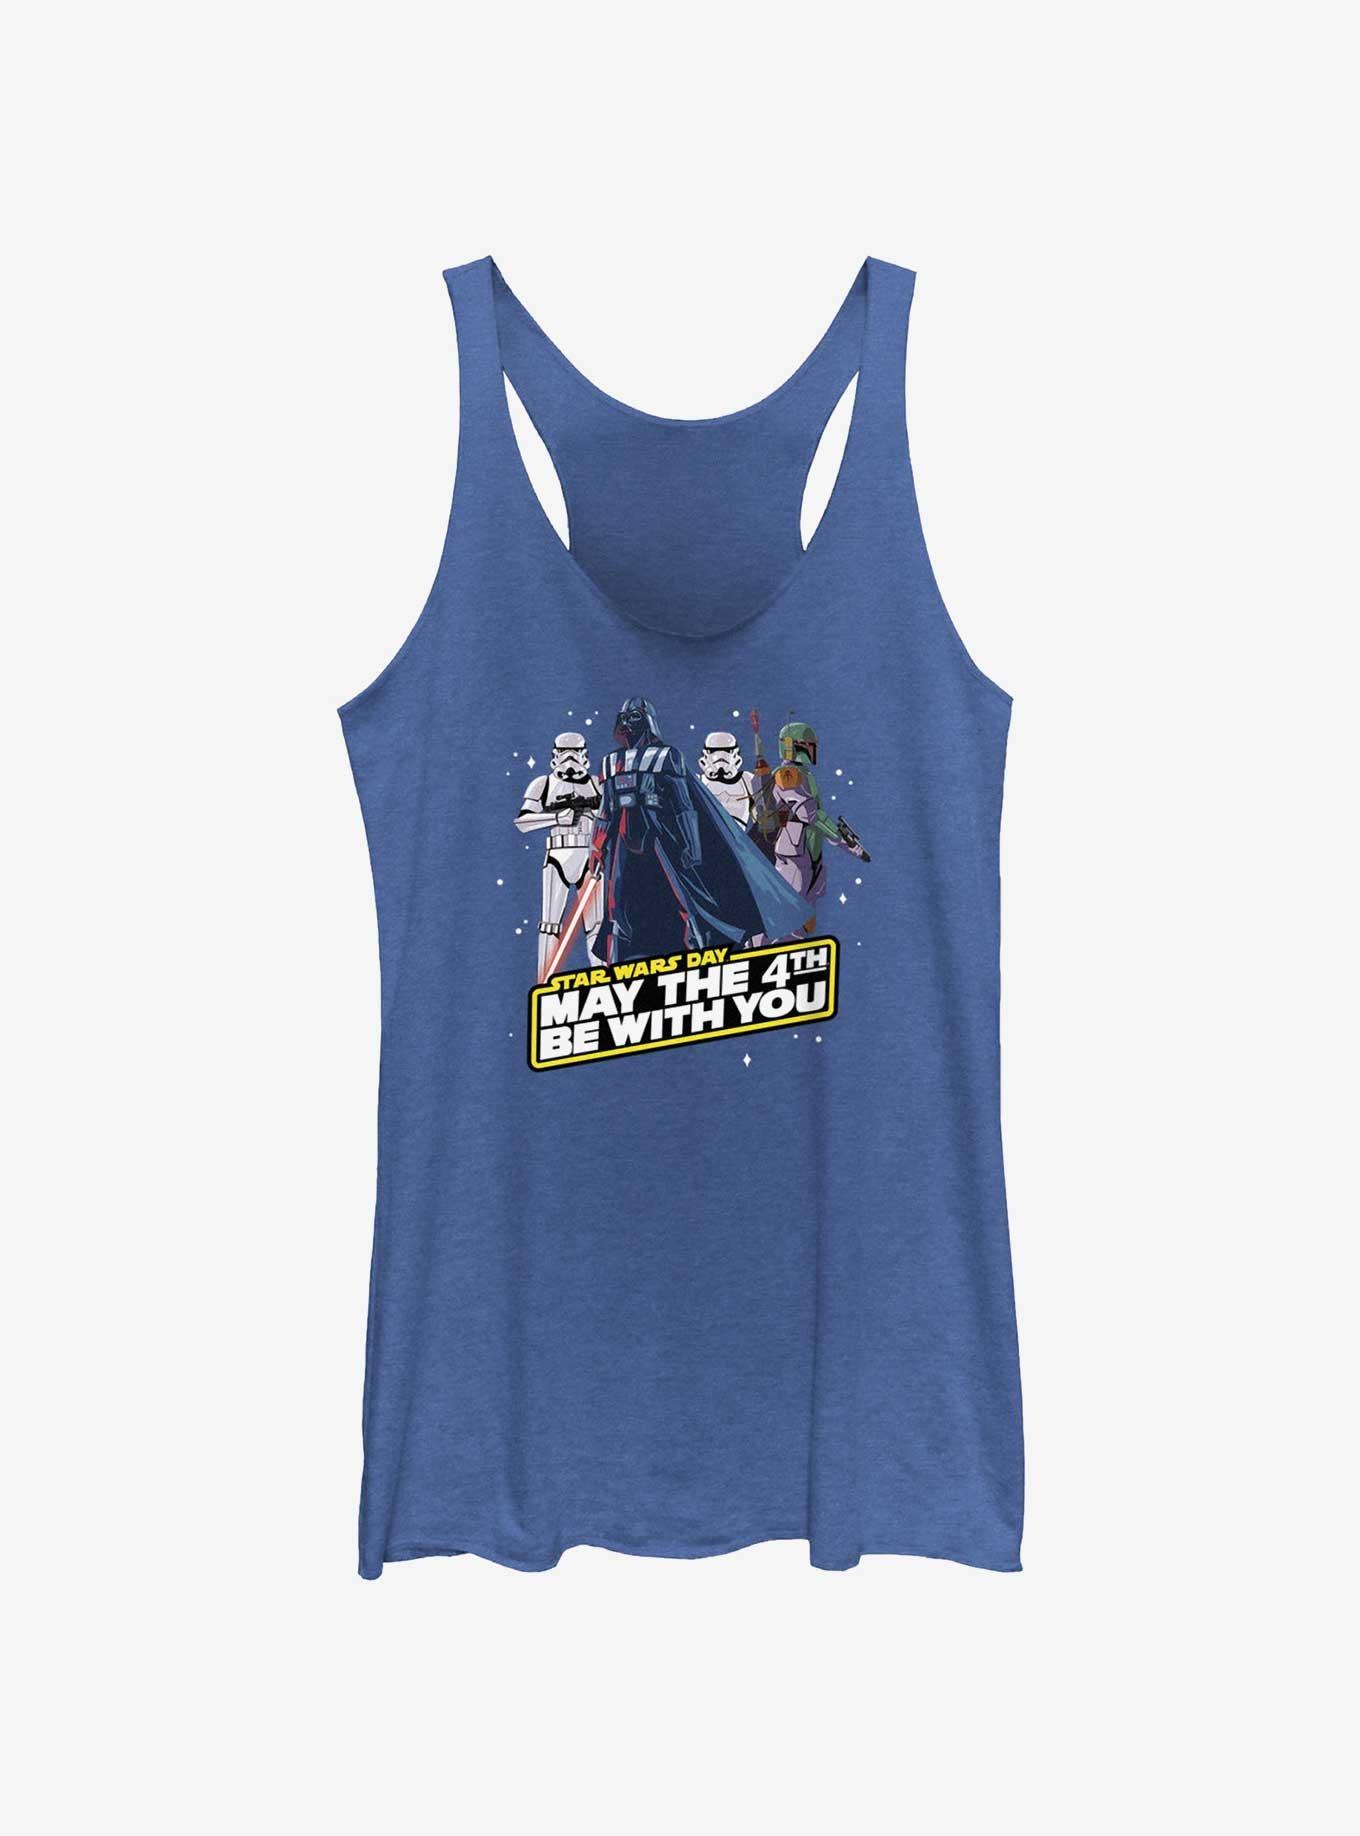 Star Wars May The Empire Be With You Girls Tank, ROY HTR, hi-res